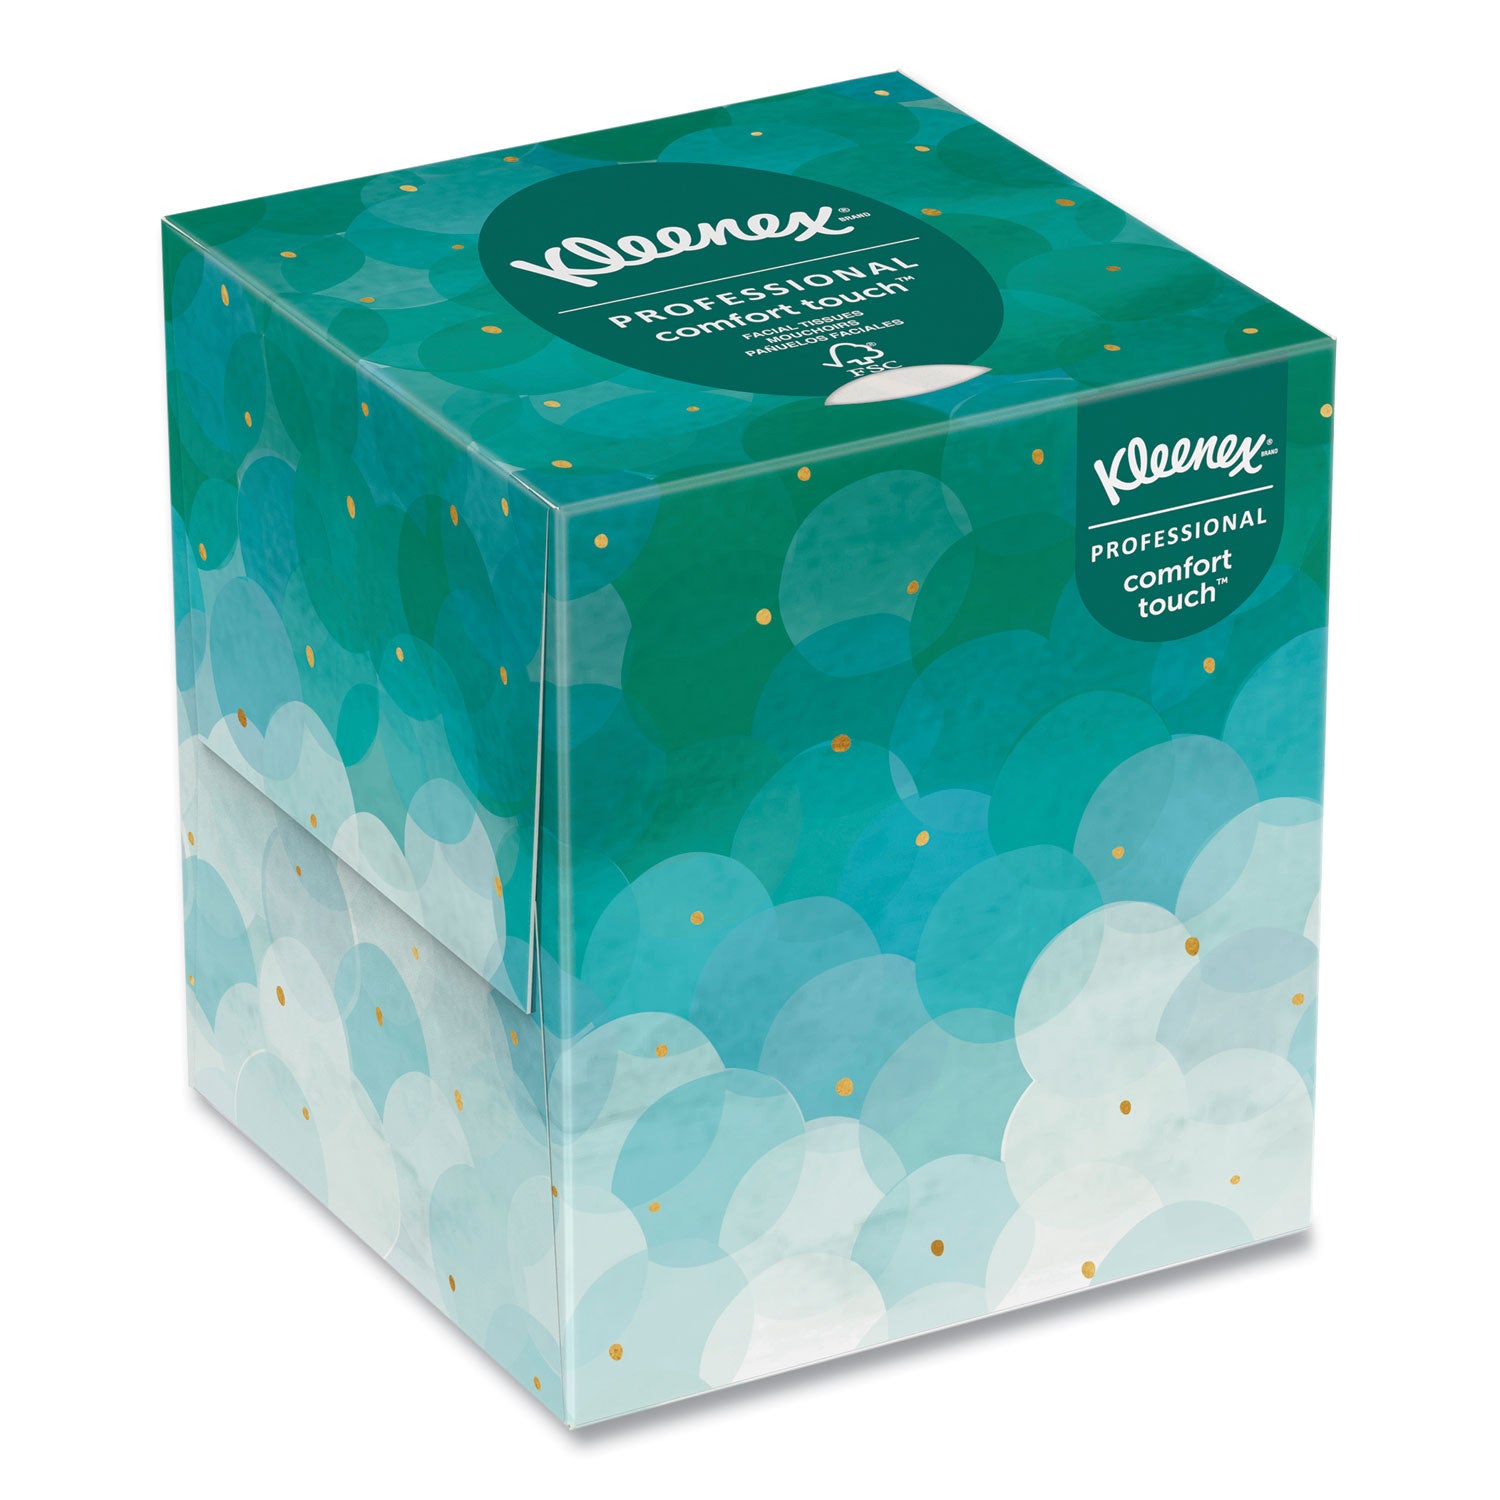 Boutique White Facial Tissue for Business, Pop-Up Box, 2-Ply, 95 Sheets/Box, 6 Boxes/Pack - 